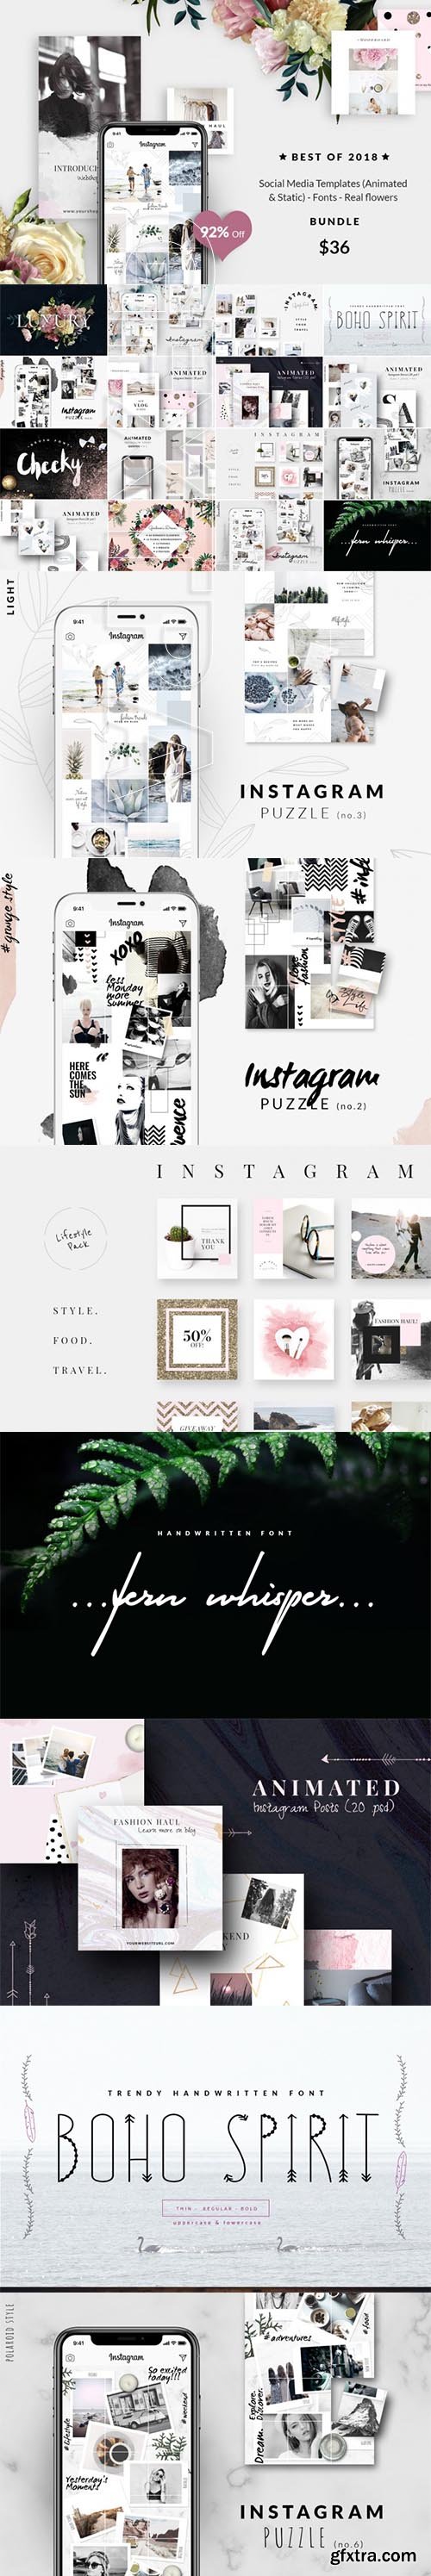 Social Media Templates (Animated & Static)-Fonts -Real flowers